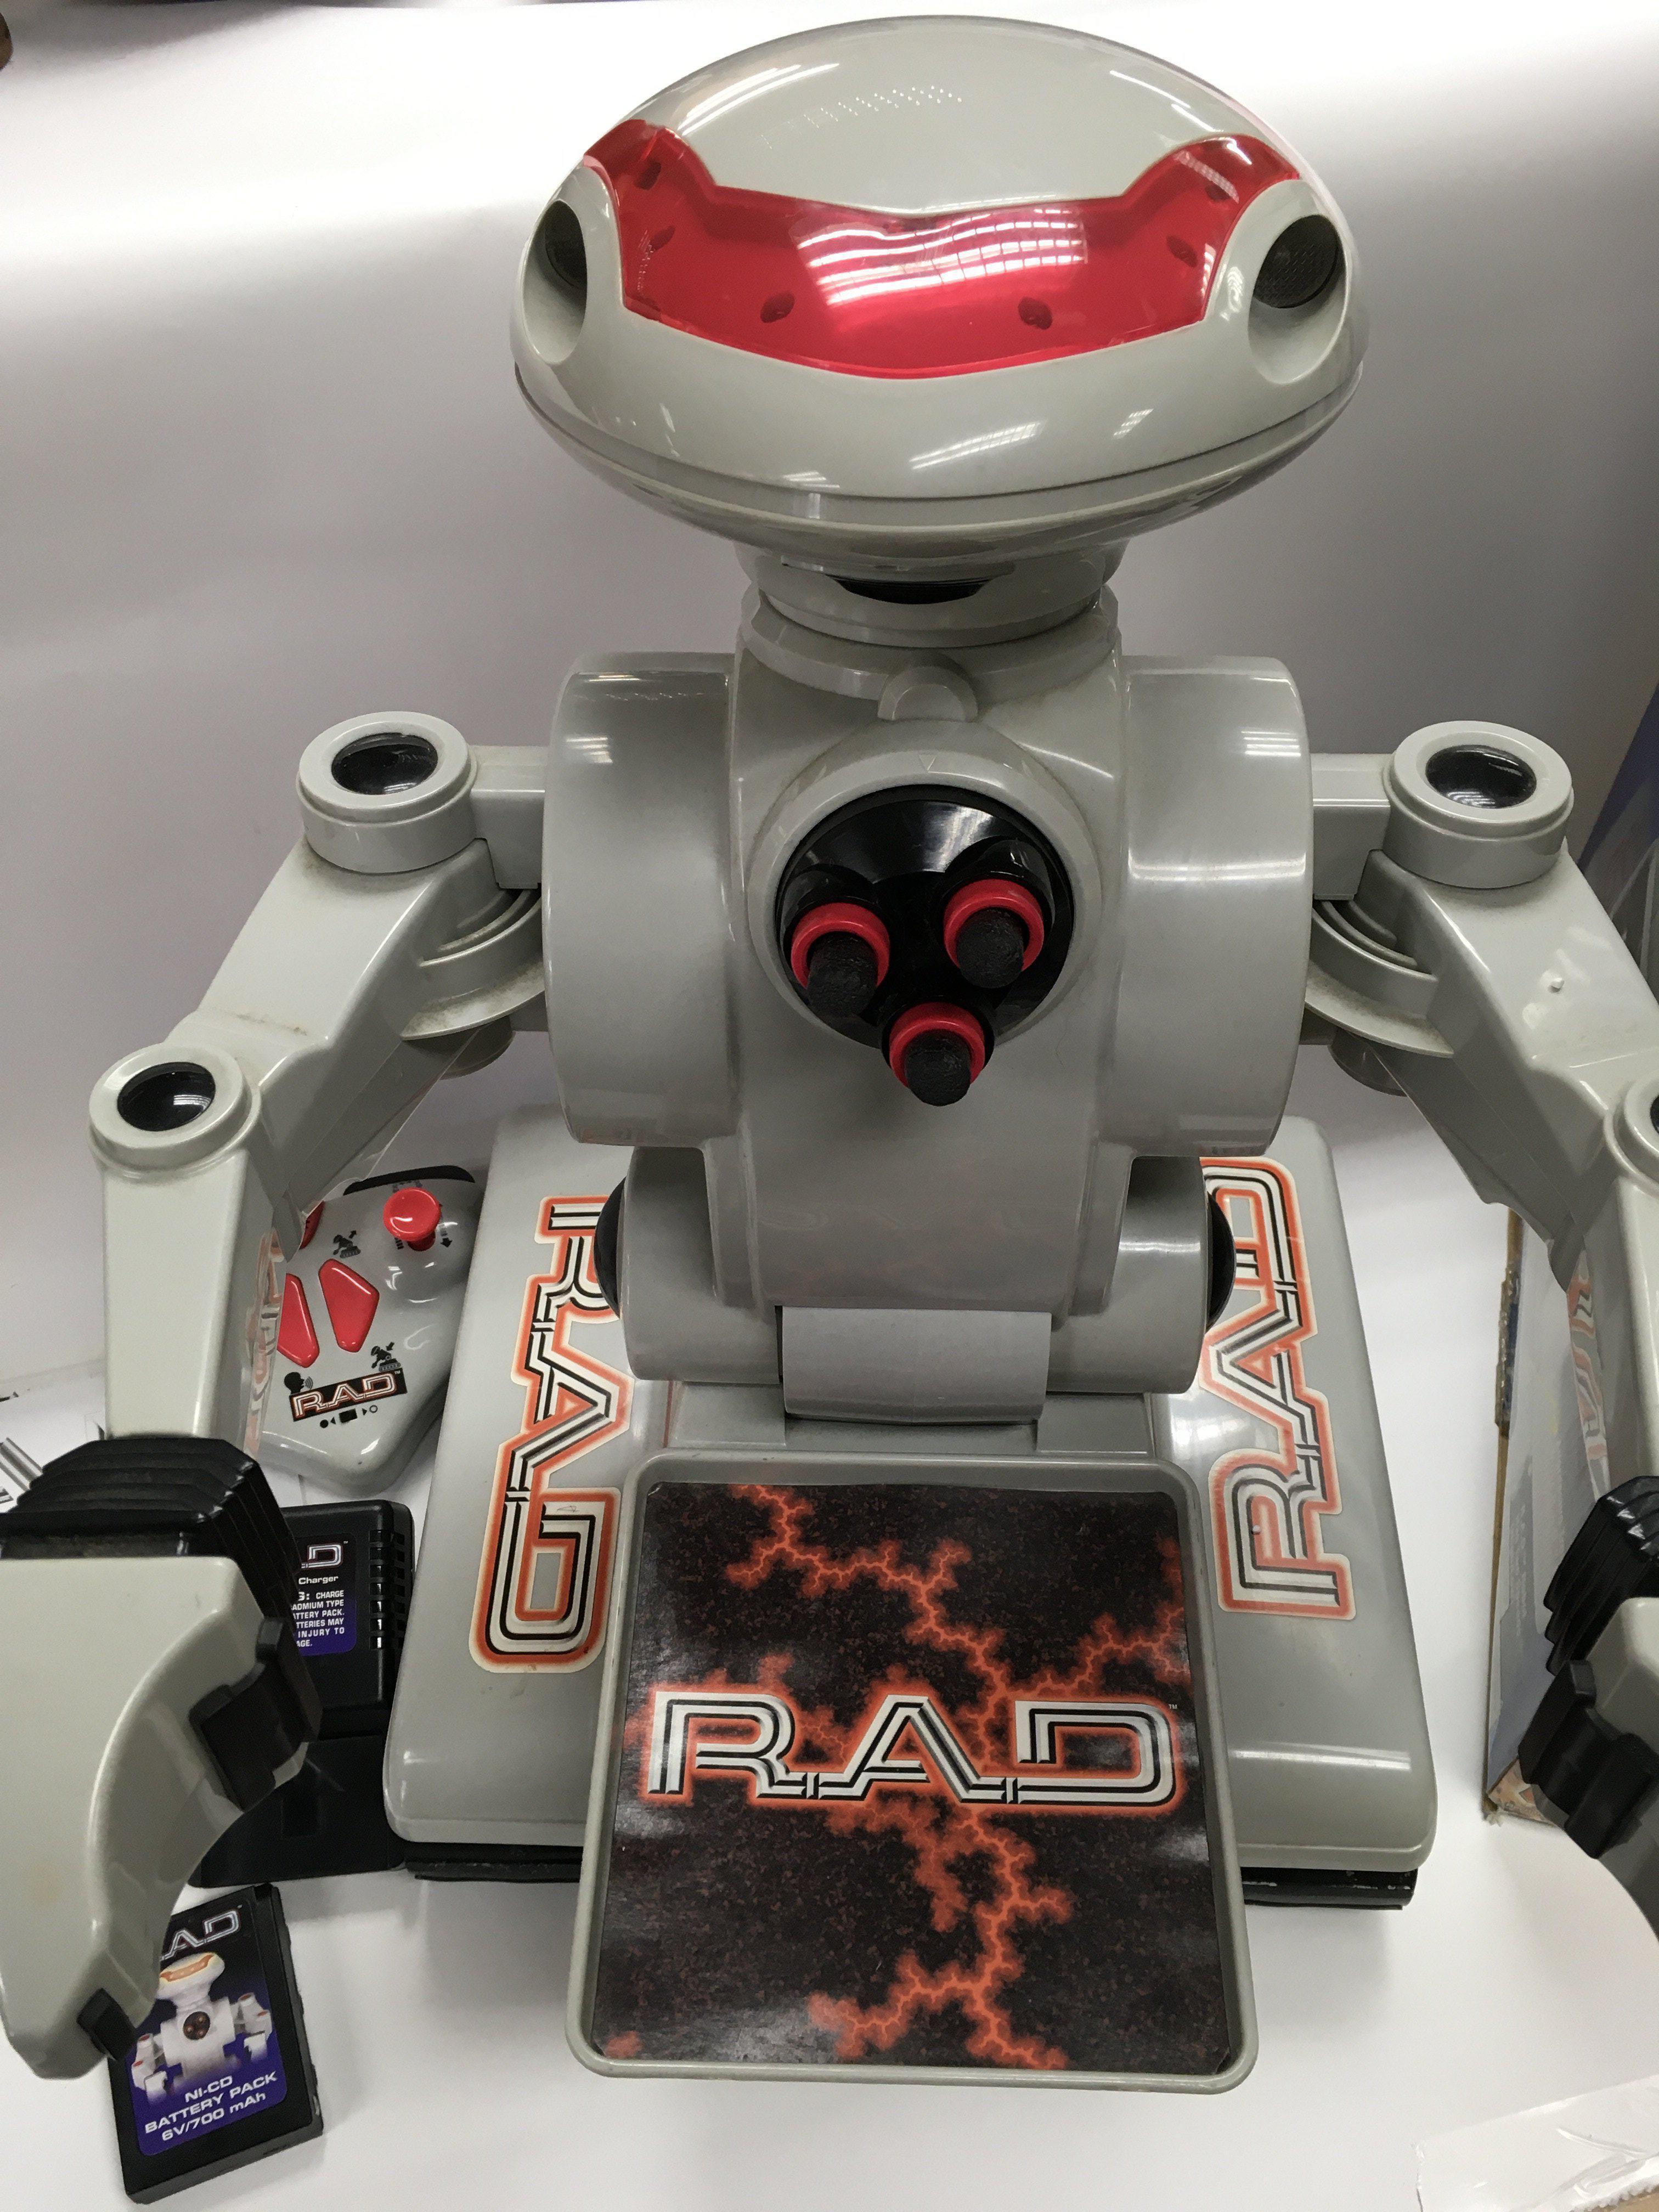 A Boxed R.A.D. Radio Controlled Robot. Approximately 48cm in height. Contains Battery pack and - Bild 4 aus 4